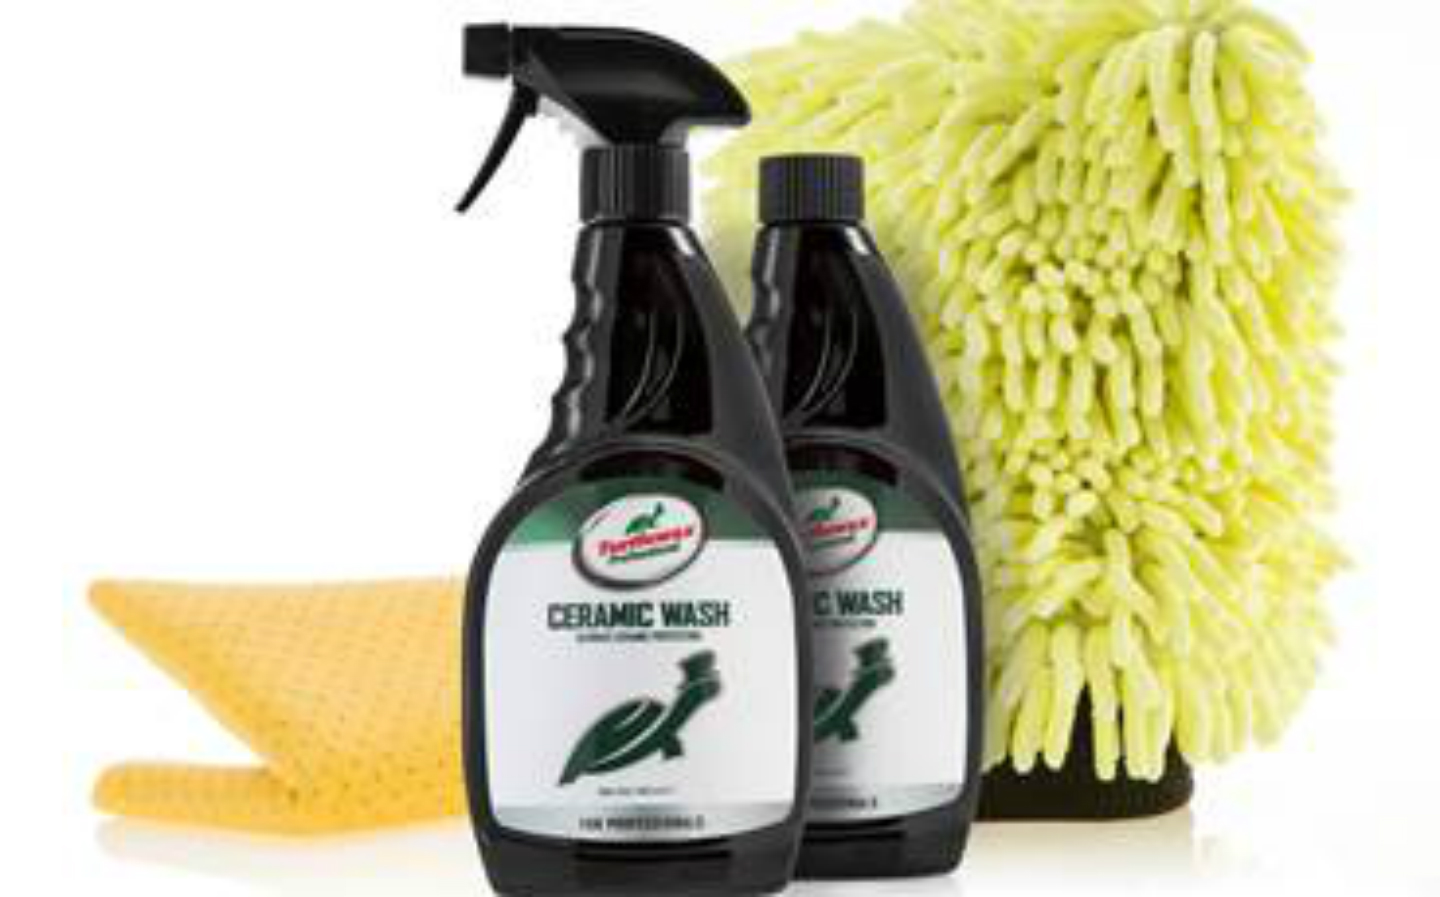 Turtle Wax Ceramic Wash review